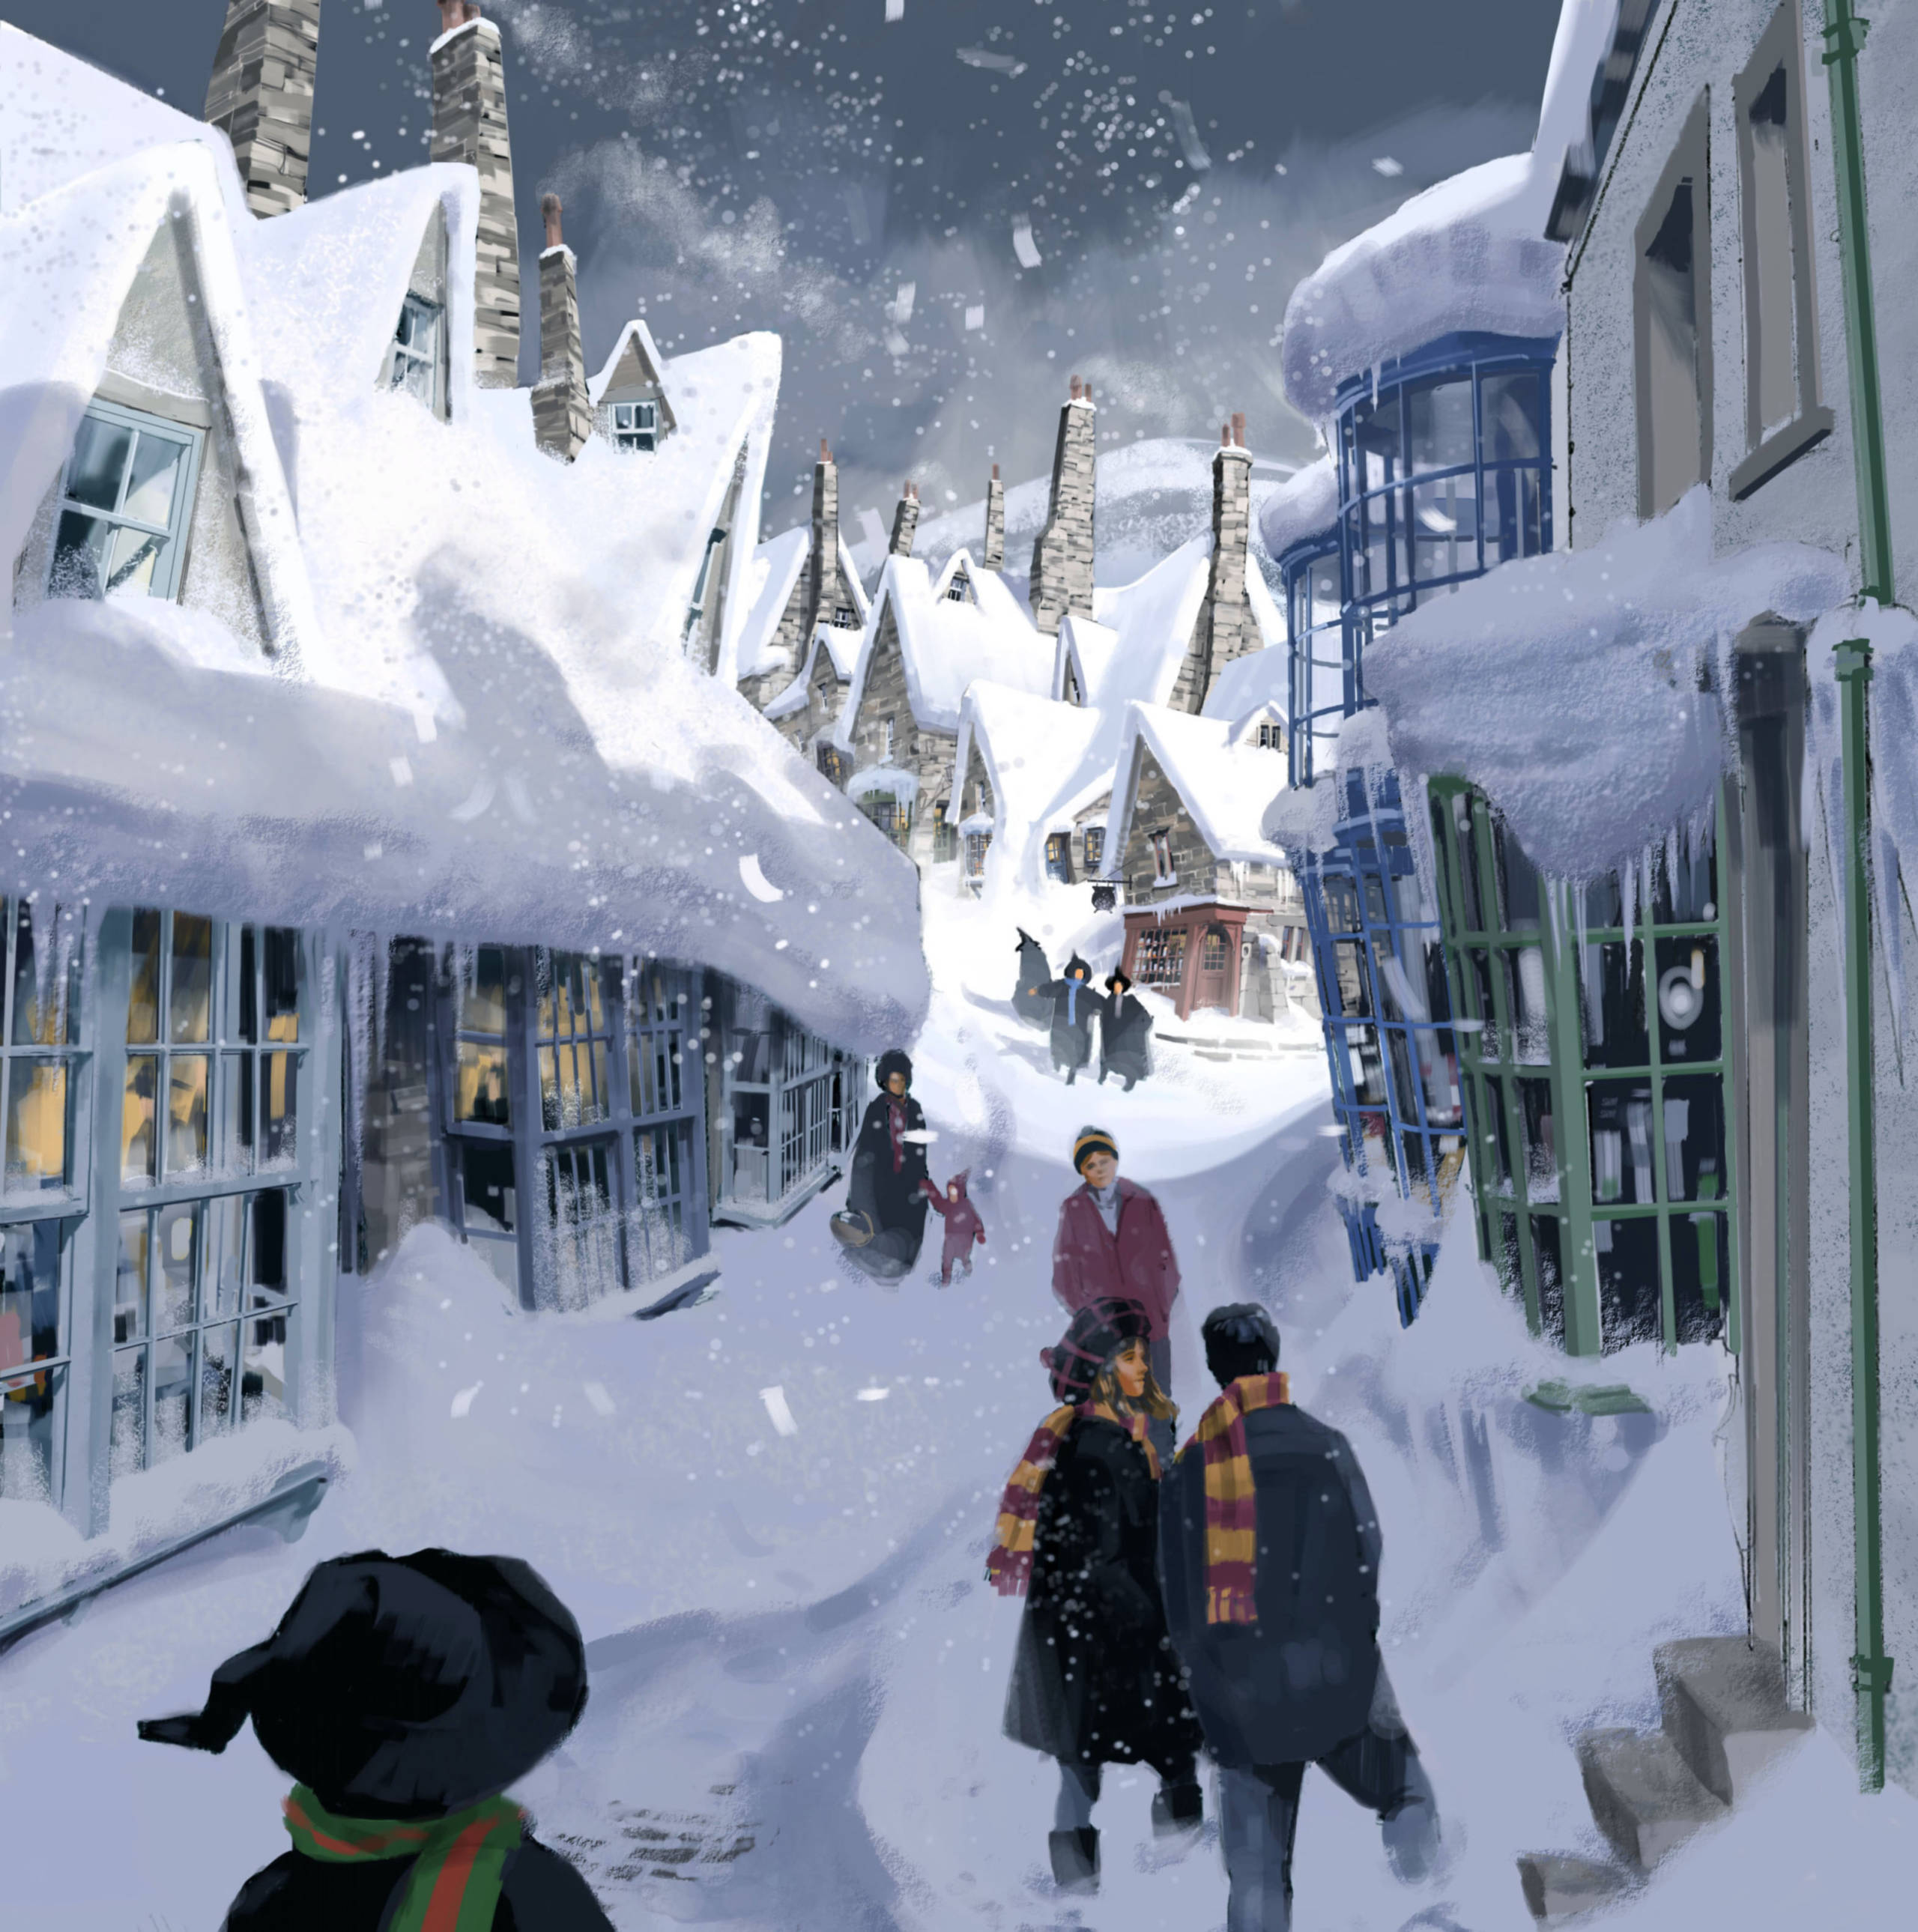 An illustration of a snowy Hogsmeade and the exterior of the Three Broomsticks.